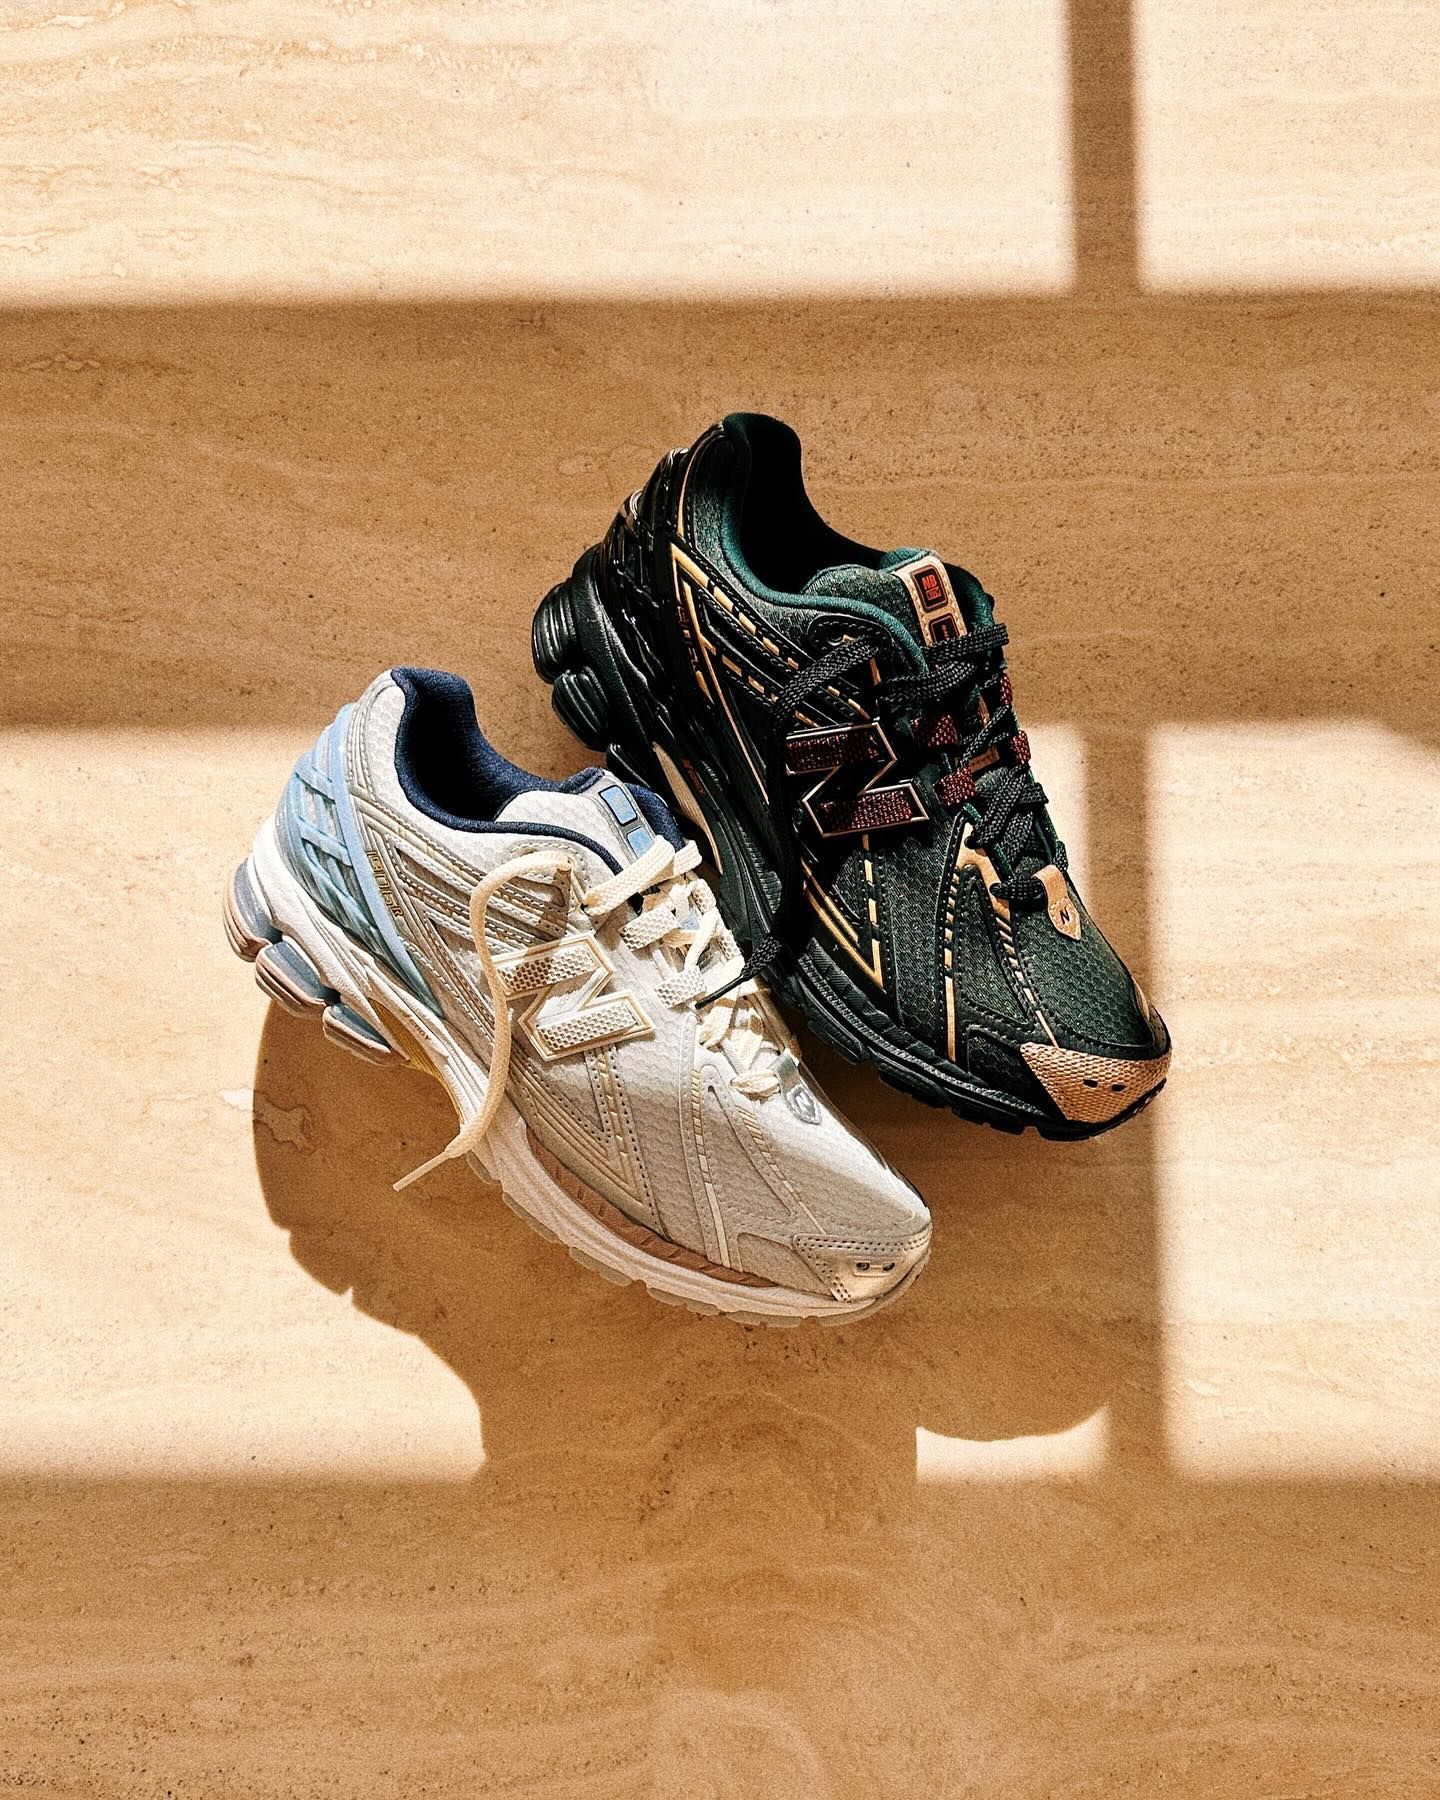 The Kith x New Balance 1906R Collection Releases Globally on March